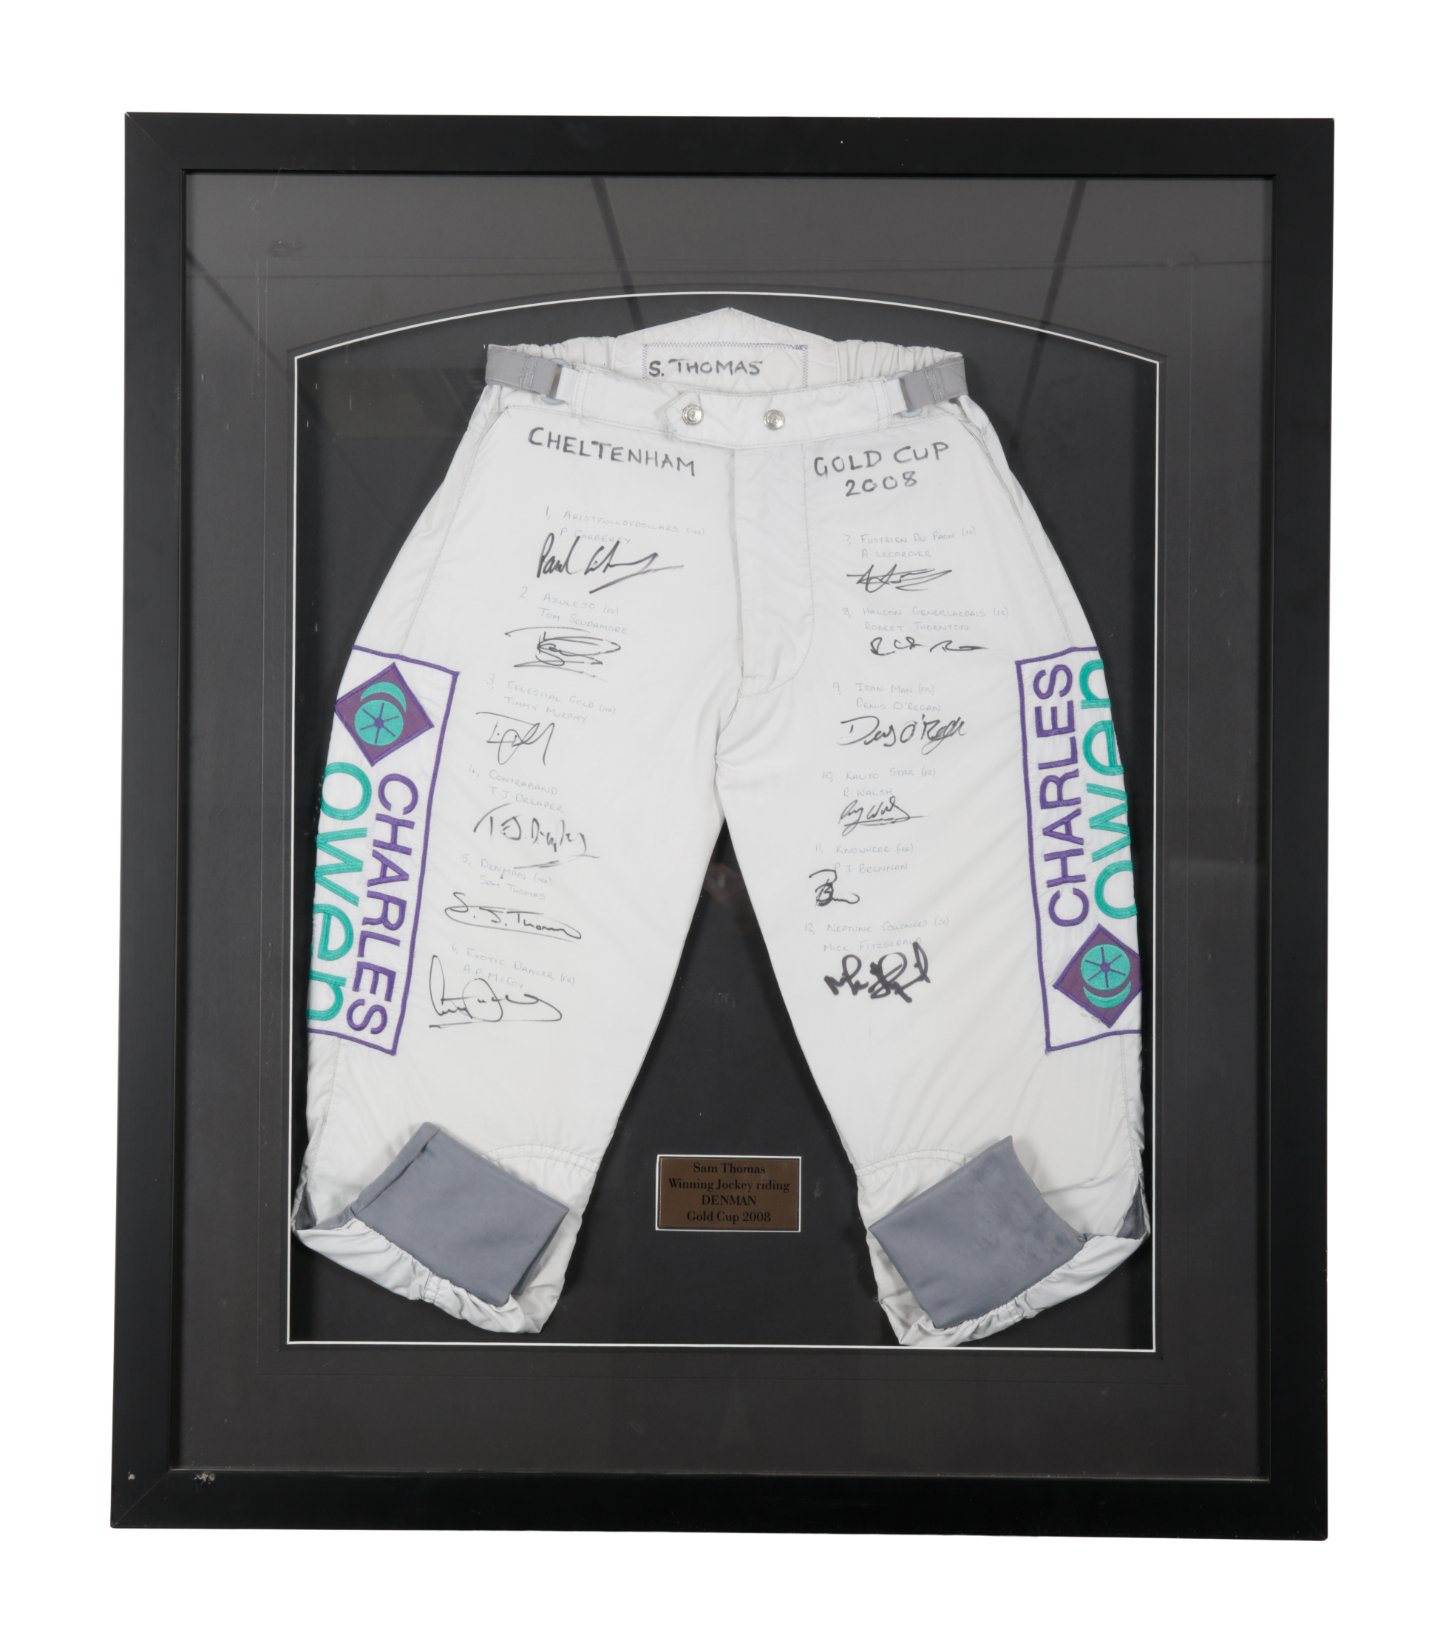 CHELTENHAM GOLD CUP 2008: TWO PAIRS OF SIGNED JOCKEY PANTS - Image 2 of 3